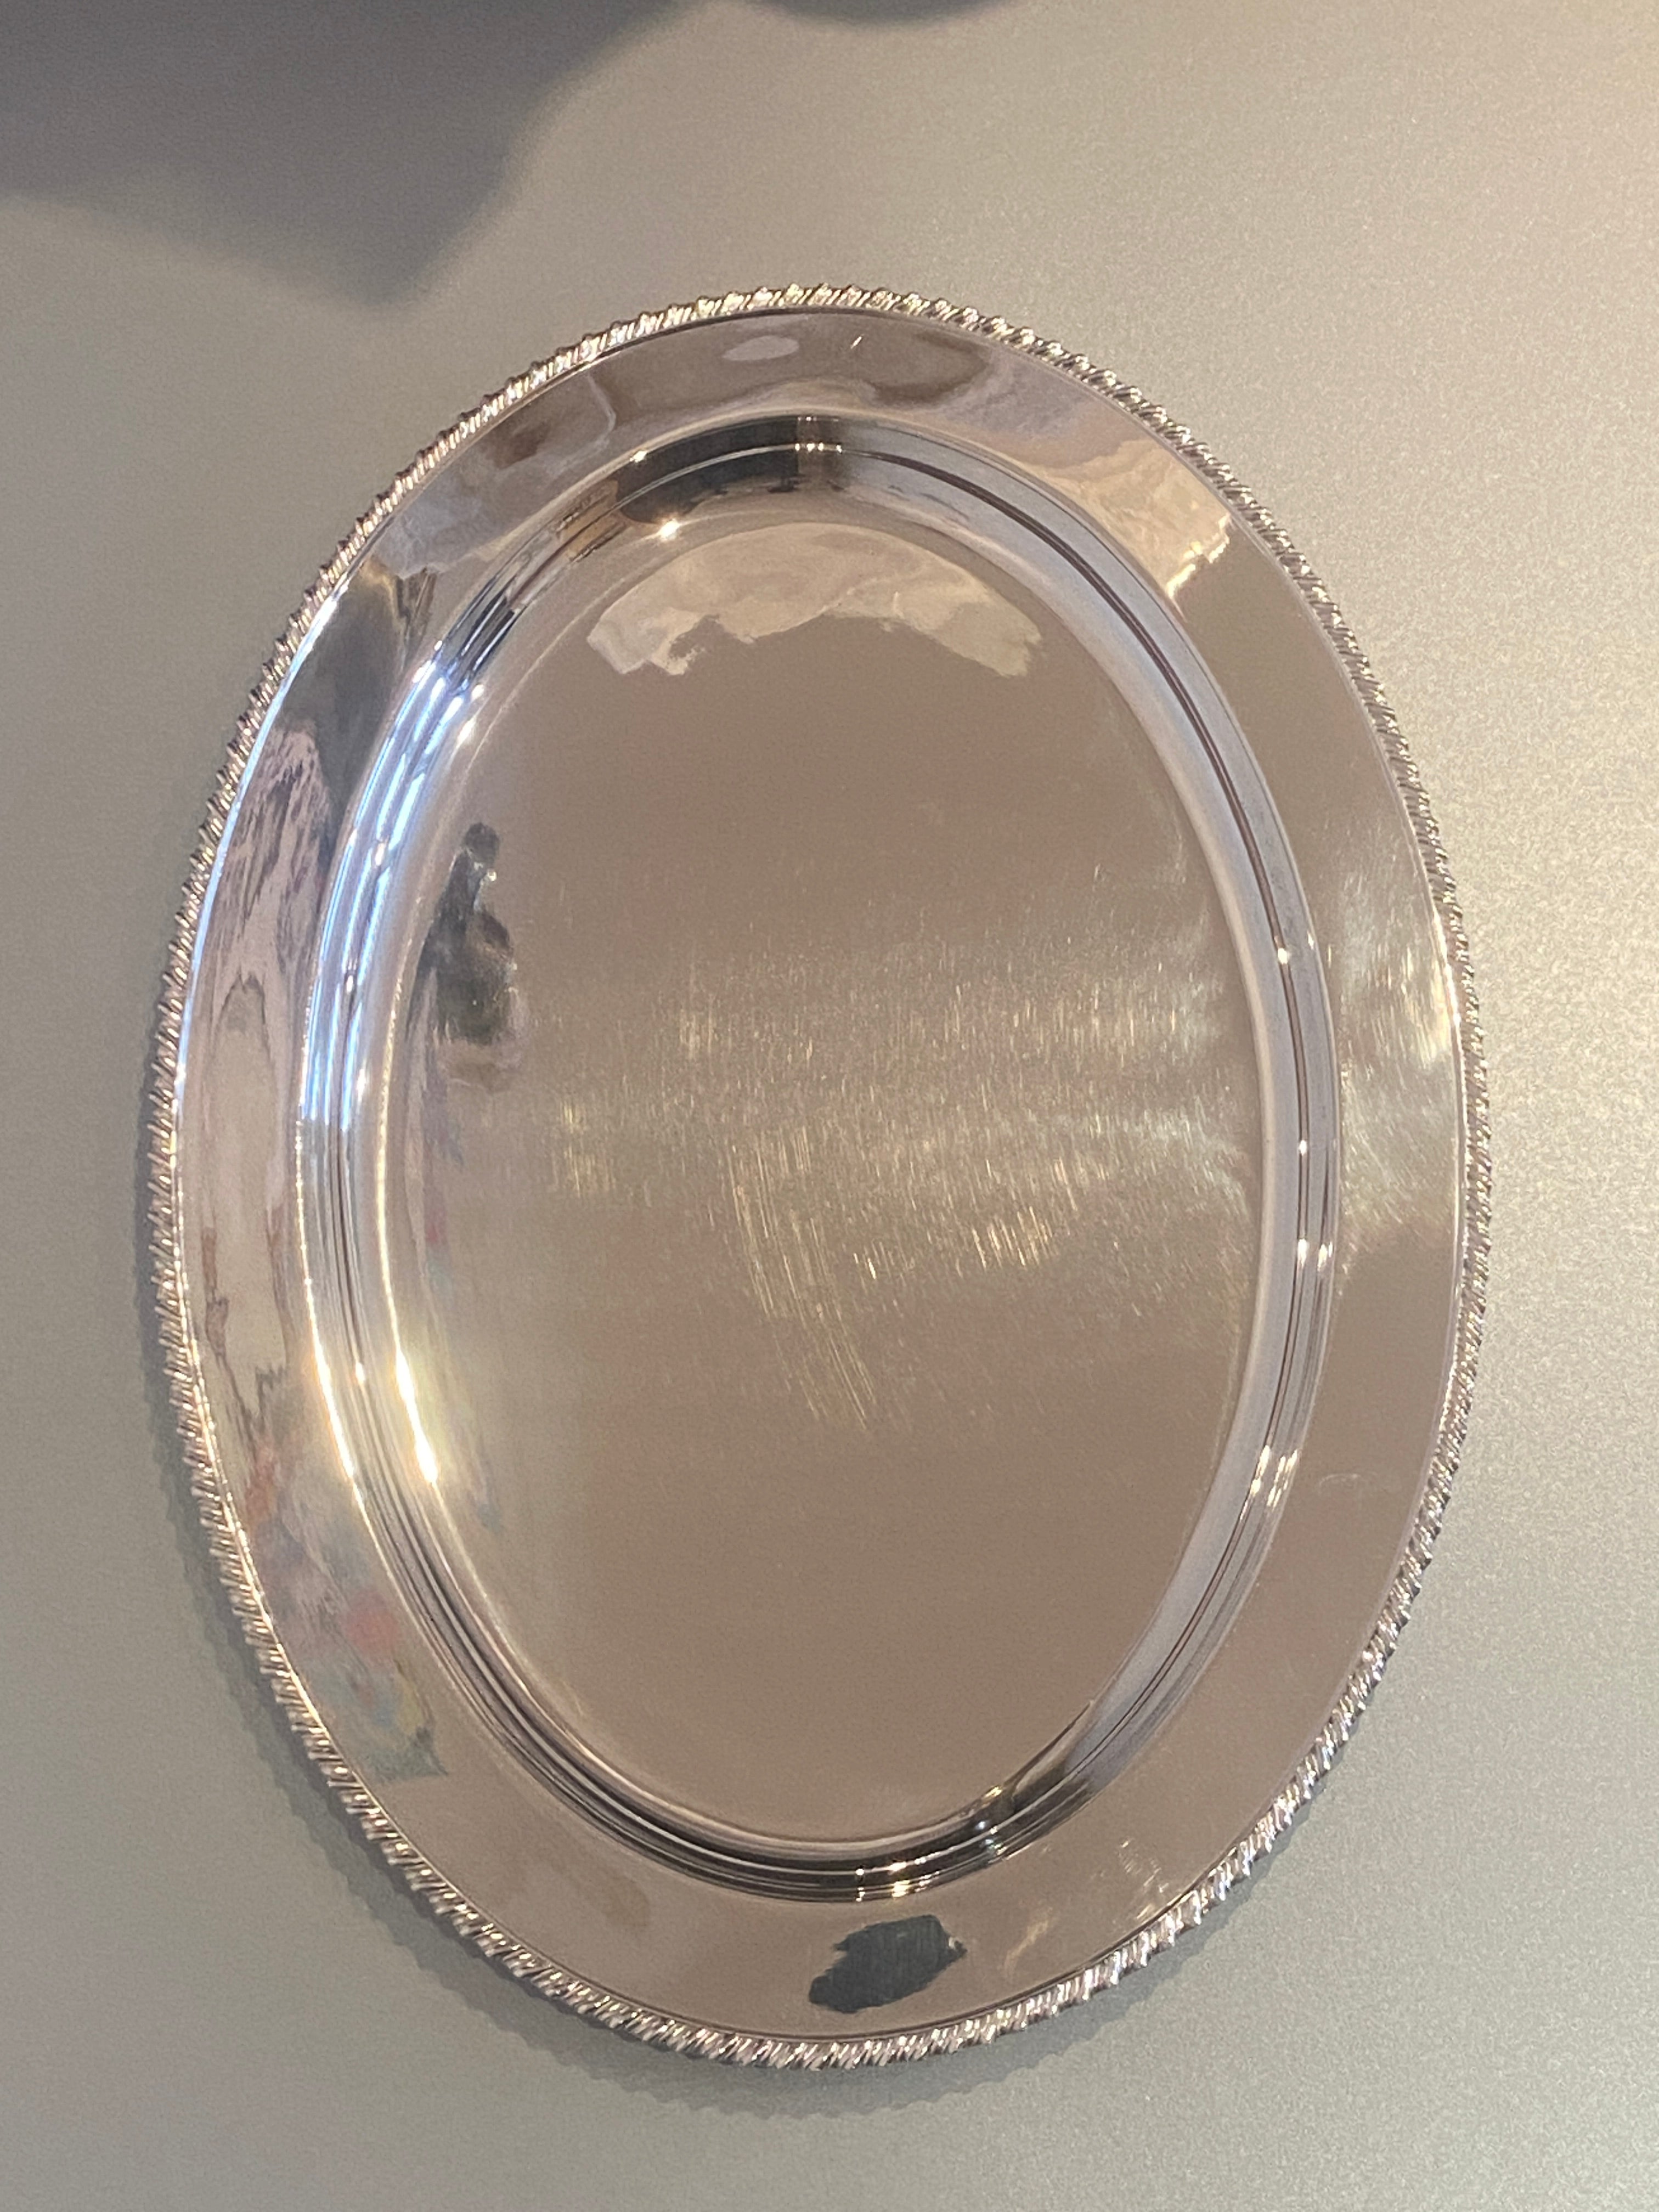 Antique Silver Plated Oval Serving Platter with Gadroon Border